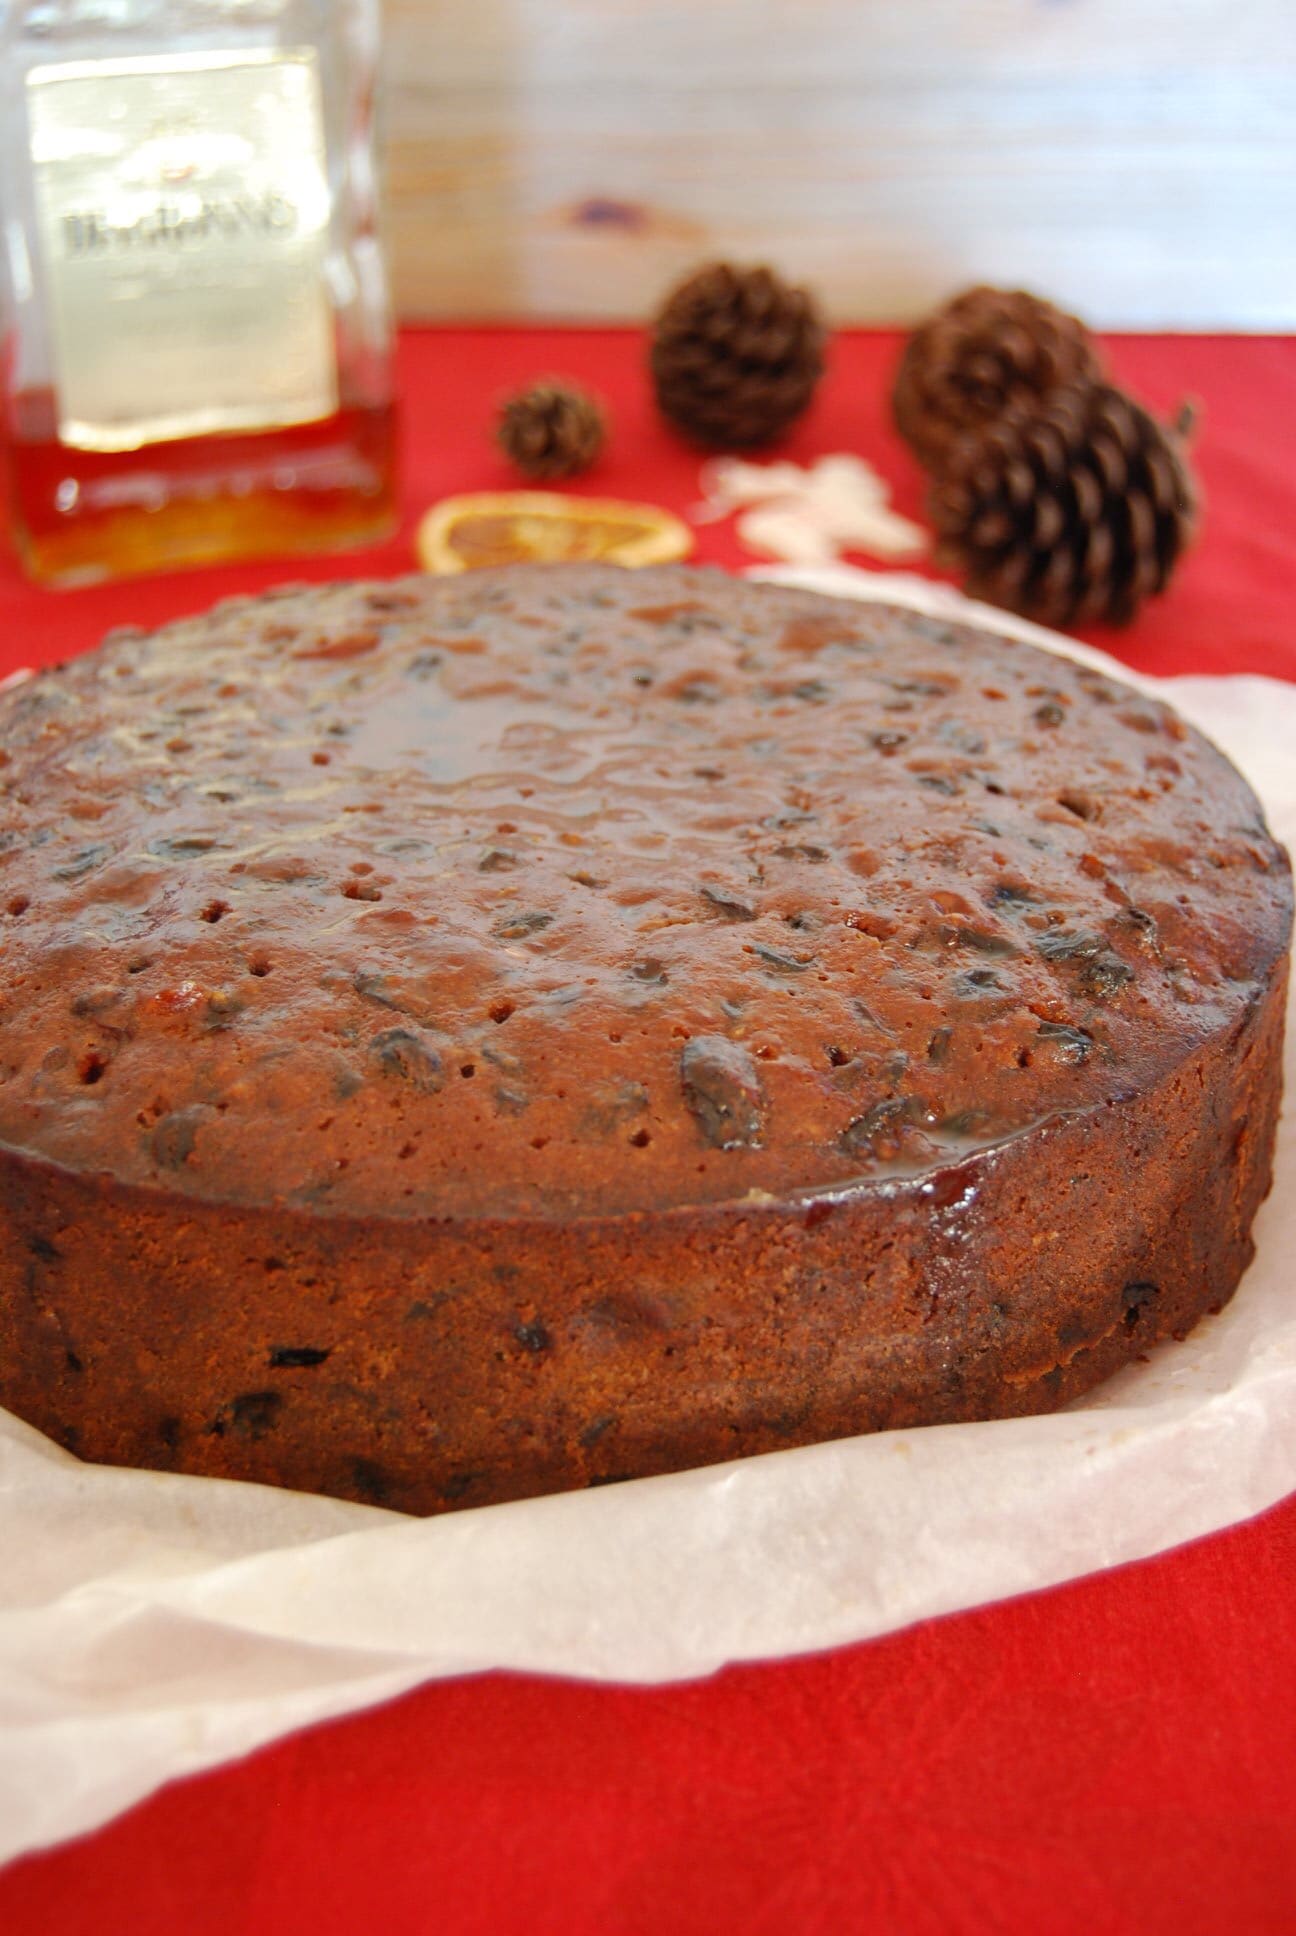 A fruit cake partially wrapped in baking parchment. A bottle of Amaretto and pine cones/orange slices can be seen in the background.